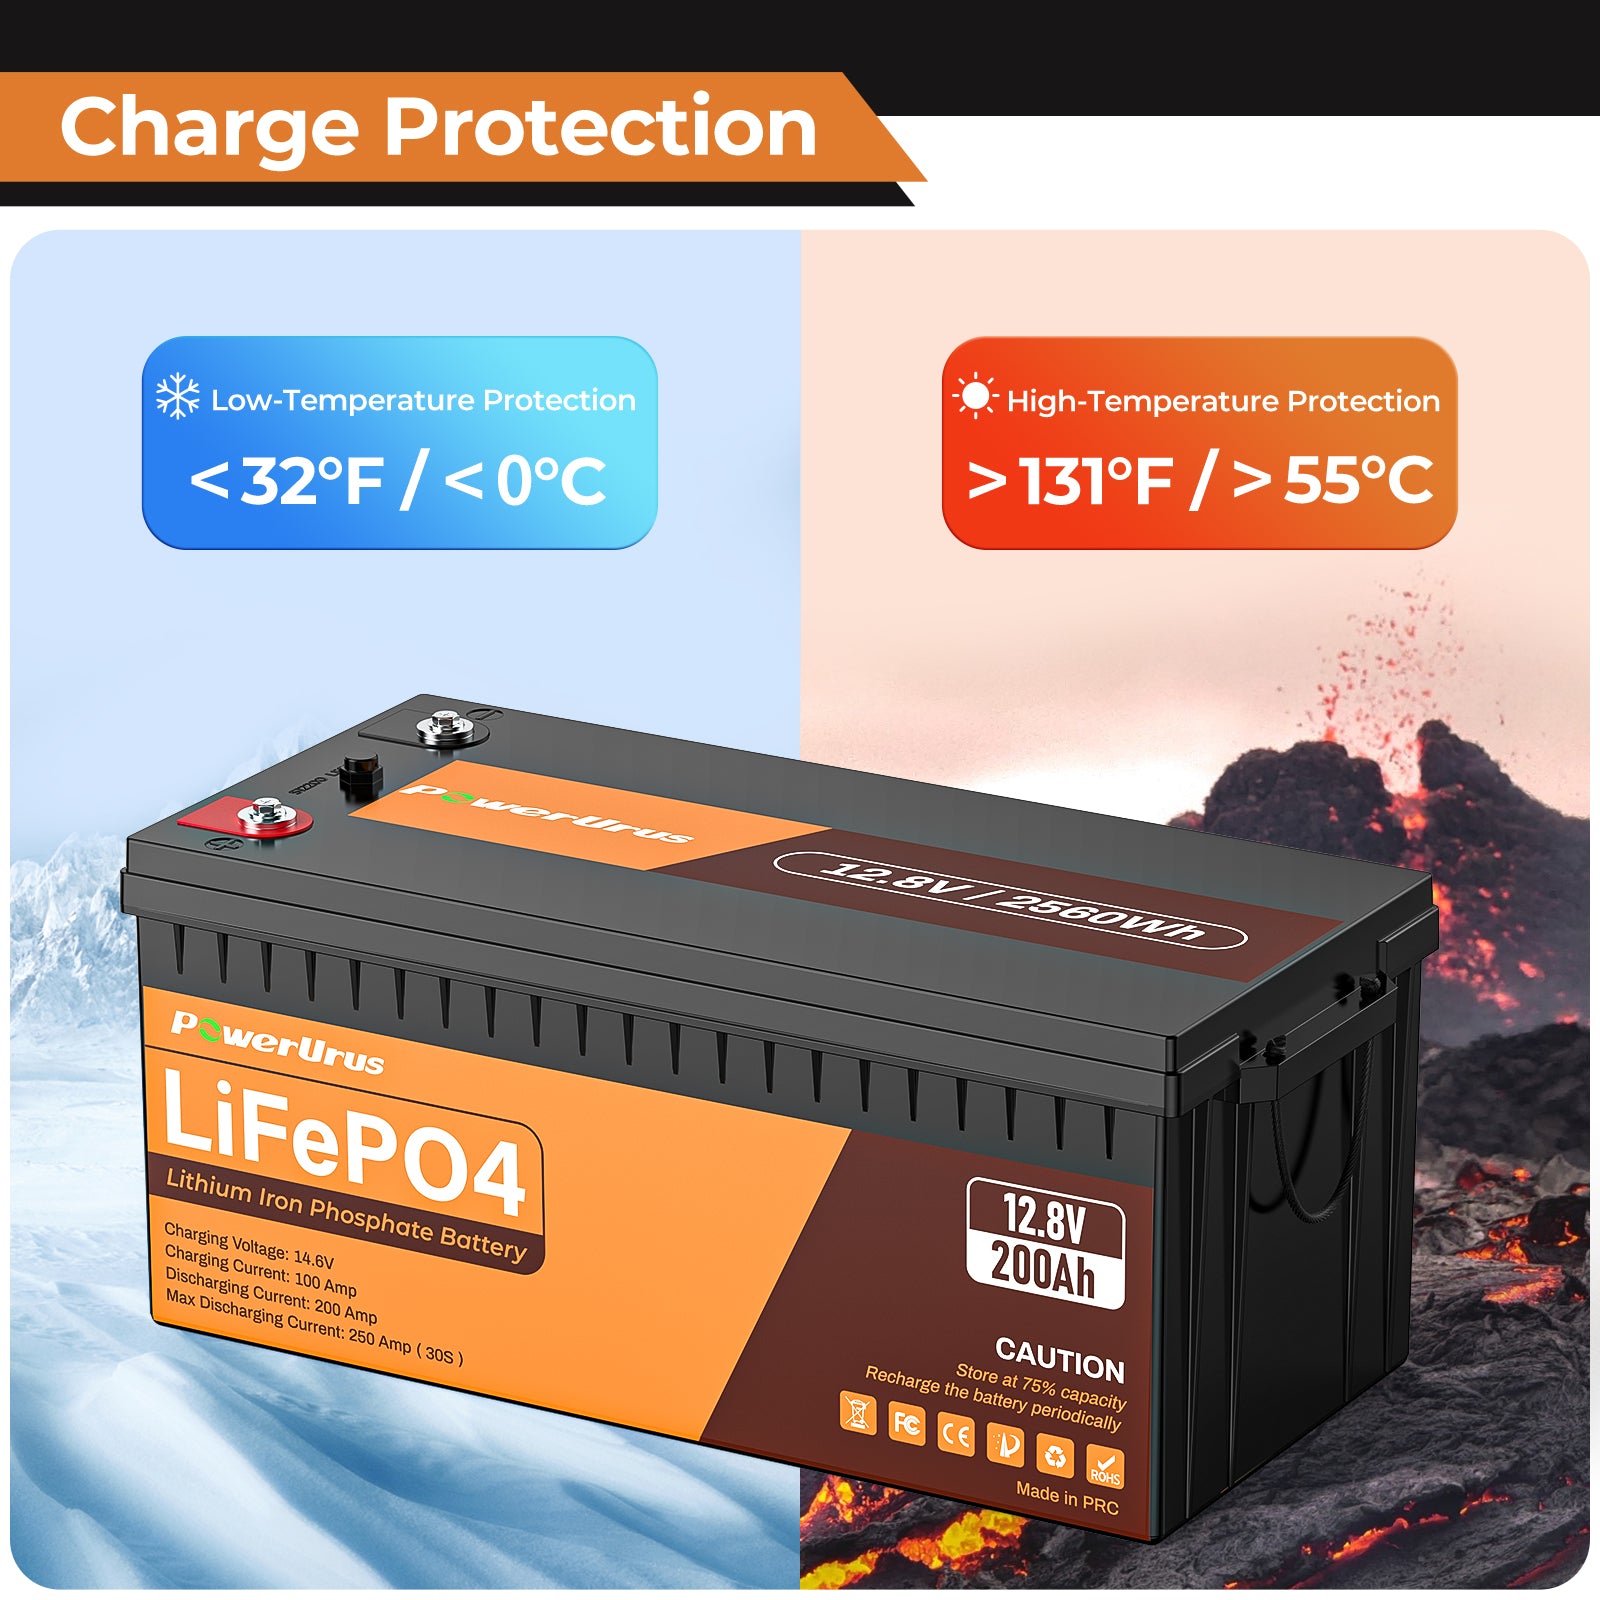 Vatrer 12V 200Ah Bluetooth LiFePO4 Lithium Battery with Self